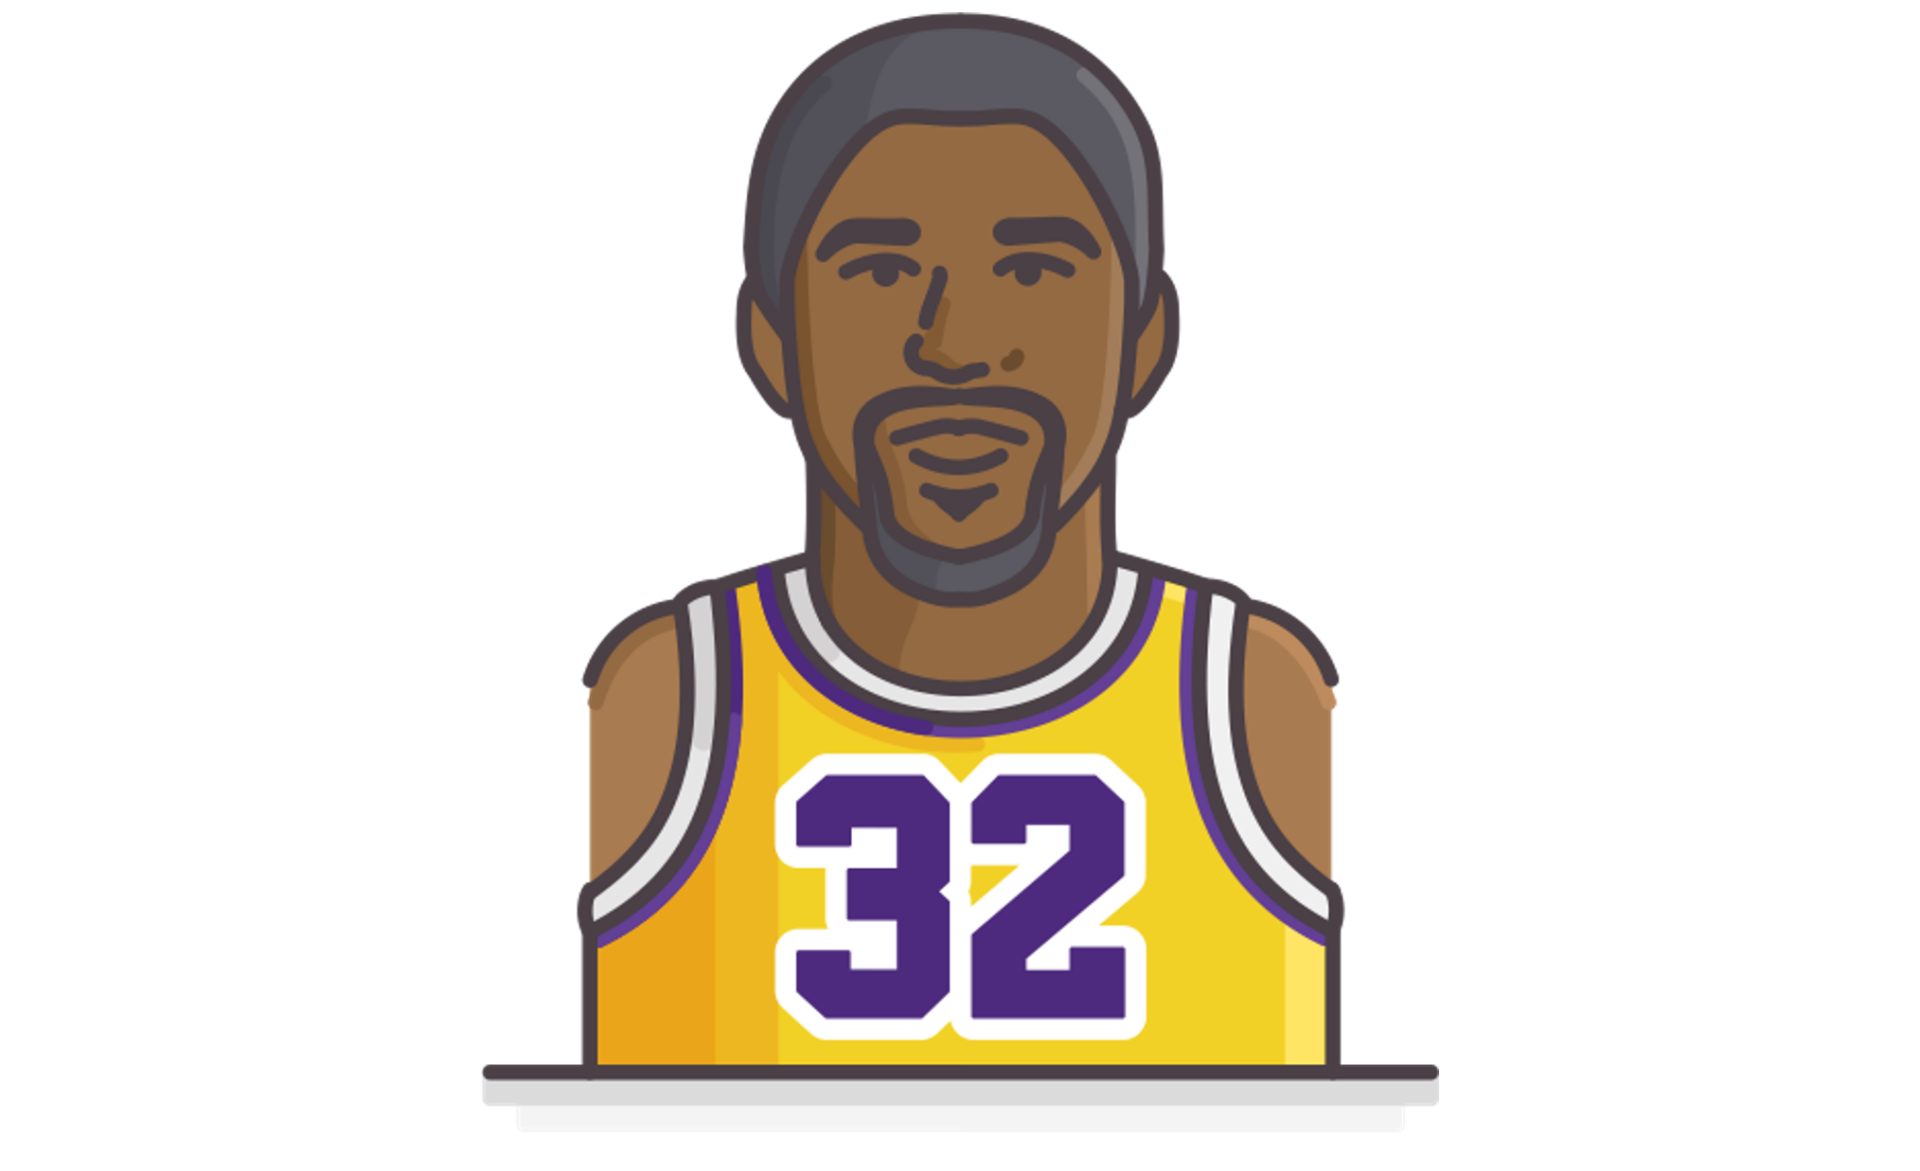 Icon of Magic Johnson in a Lakers jersey from the Showtime era